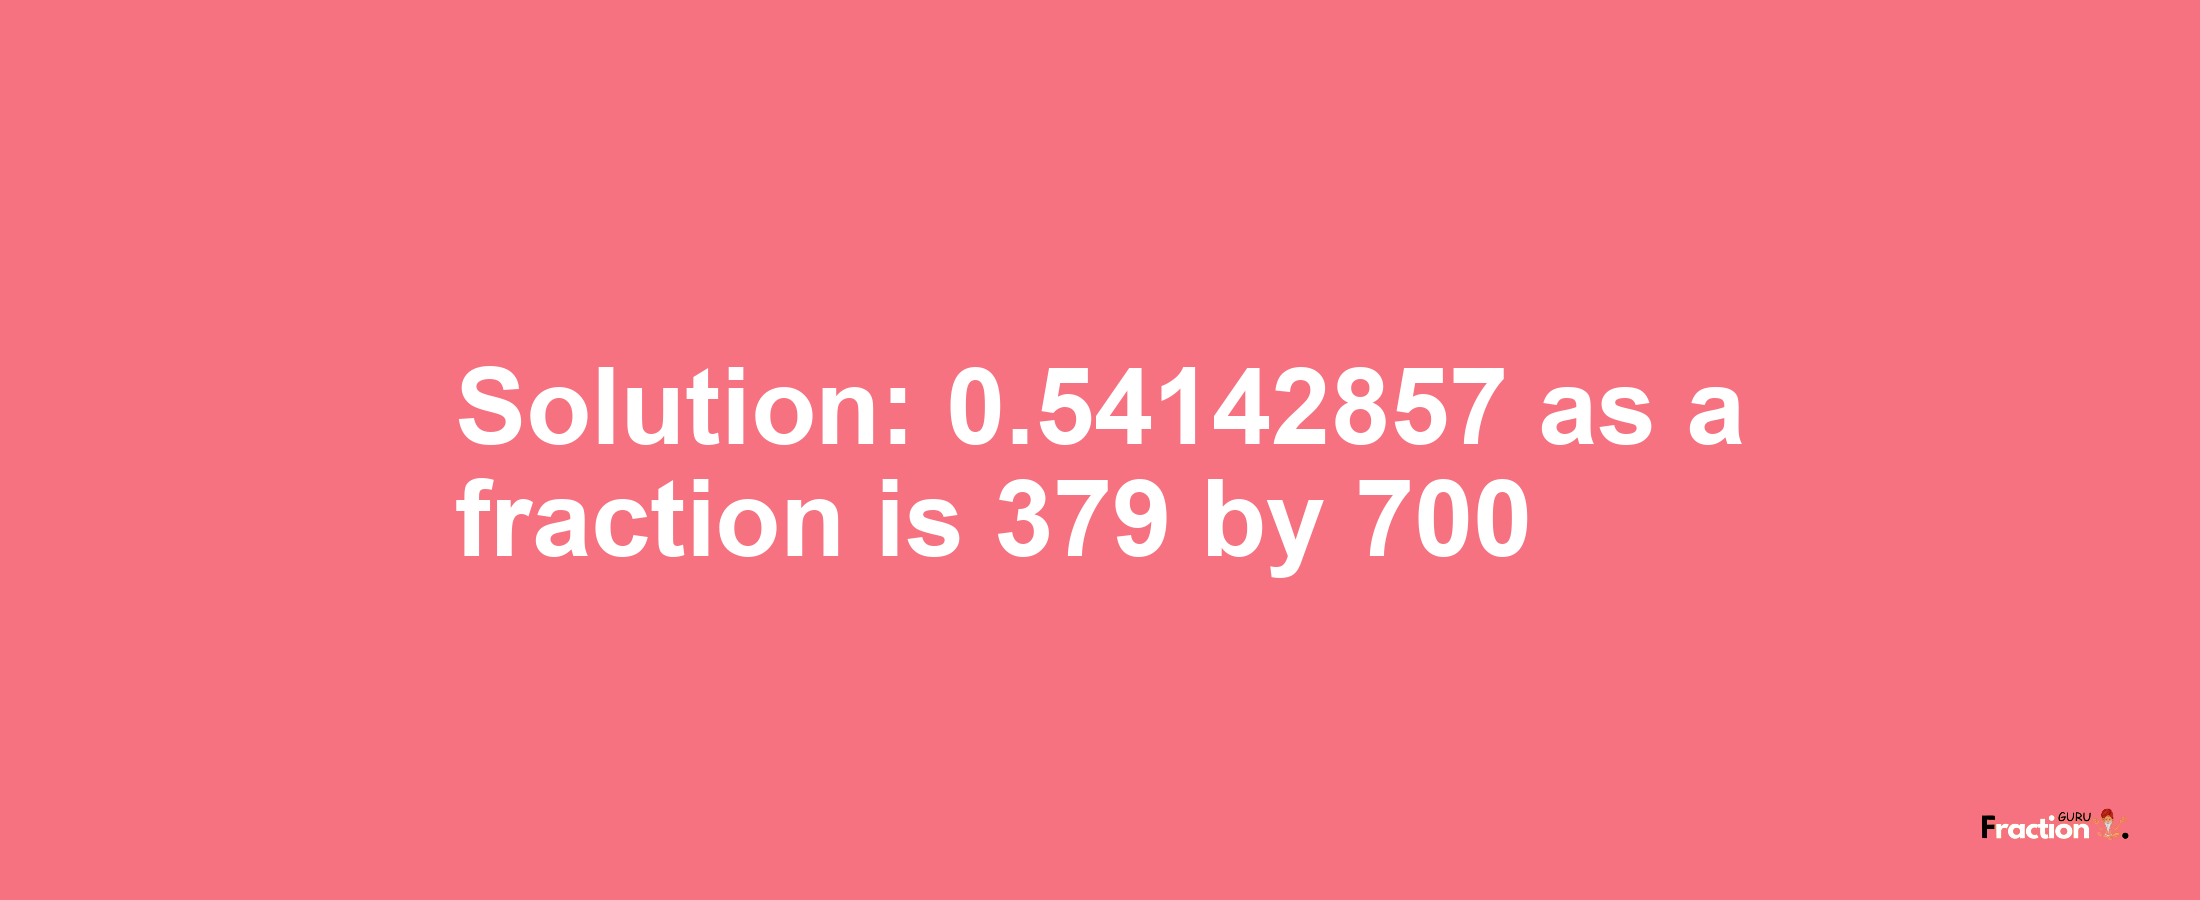 Solution:0.54142857 as a fraction is 379/700